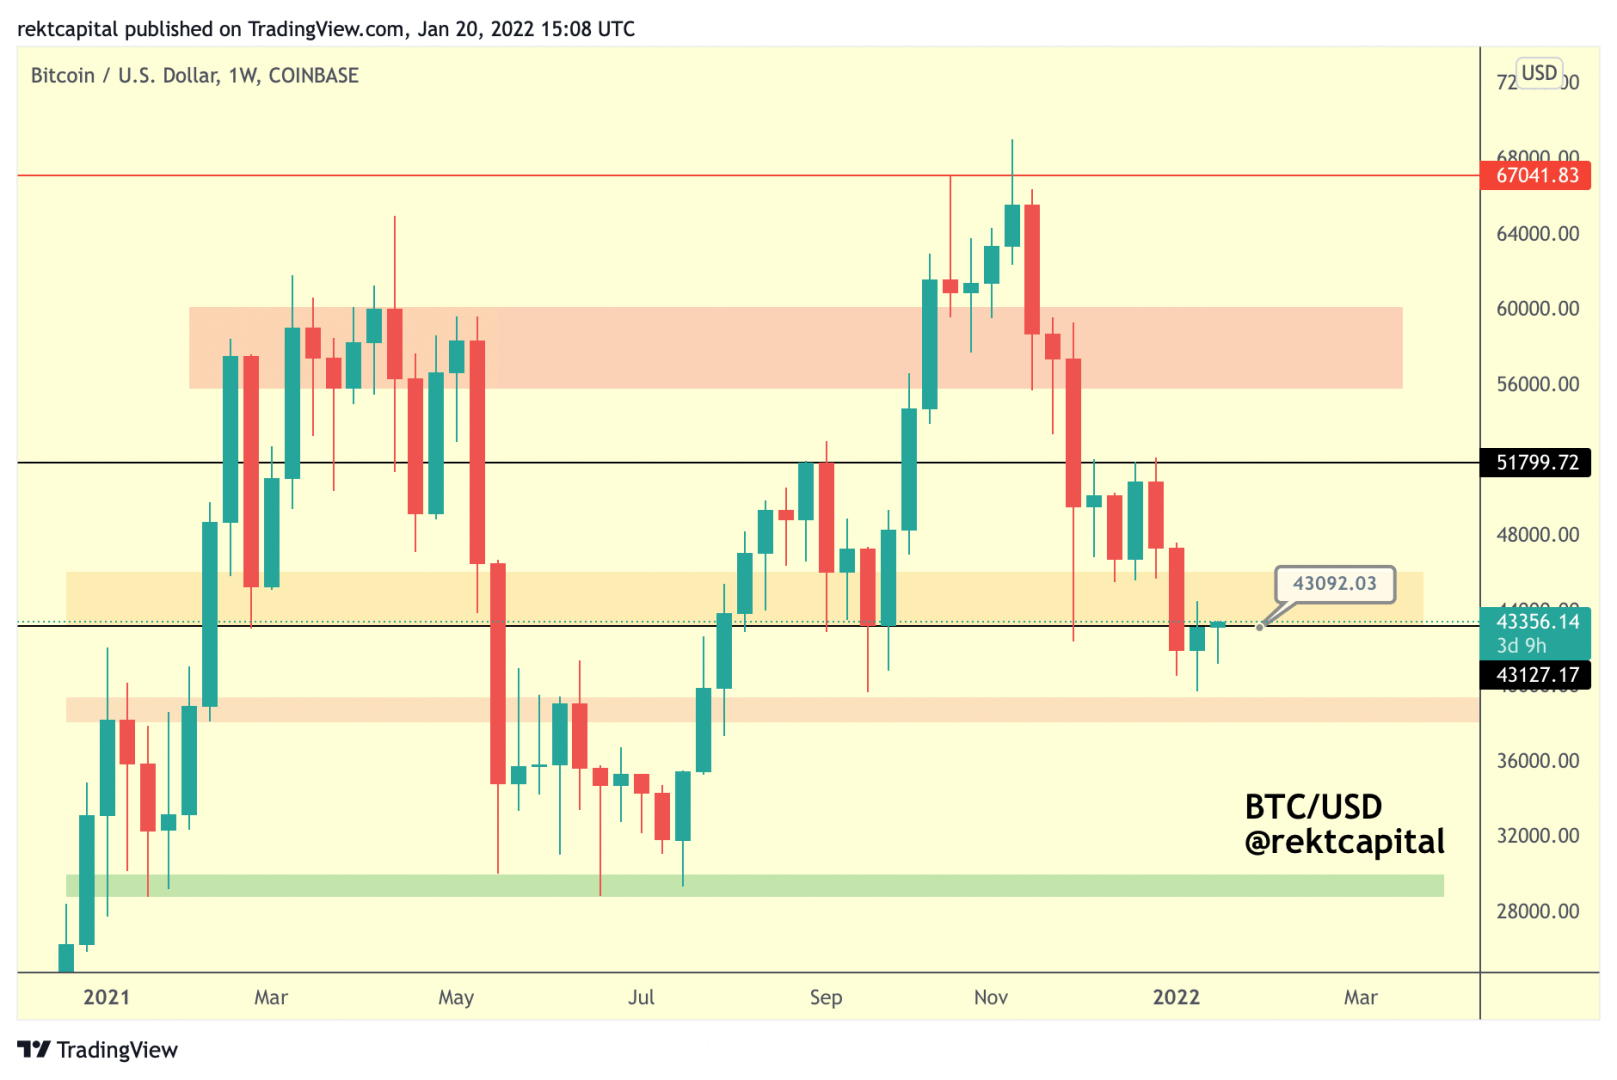 The bulls need to close the week above $43,100 for bitcoin (BTC) to take advantage of the current upside momentum.